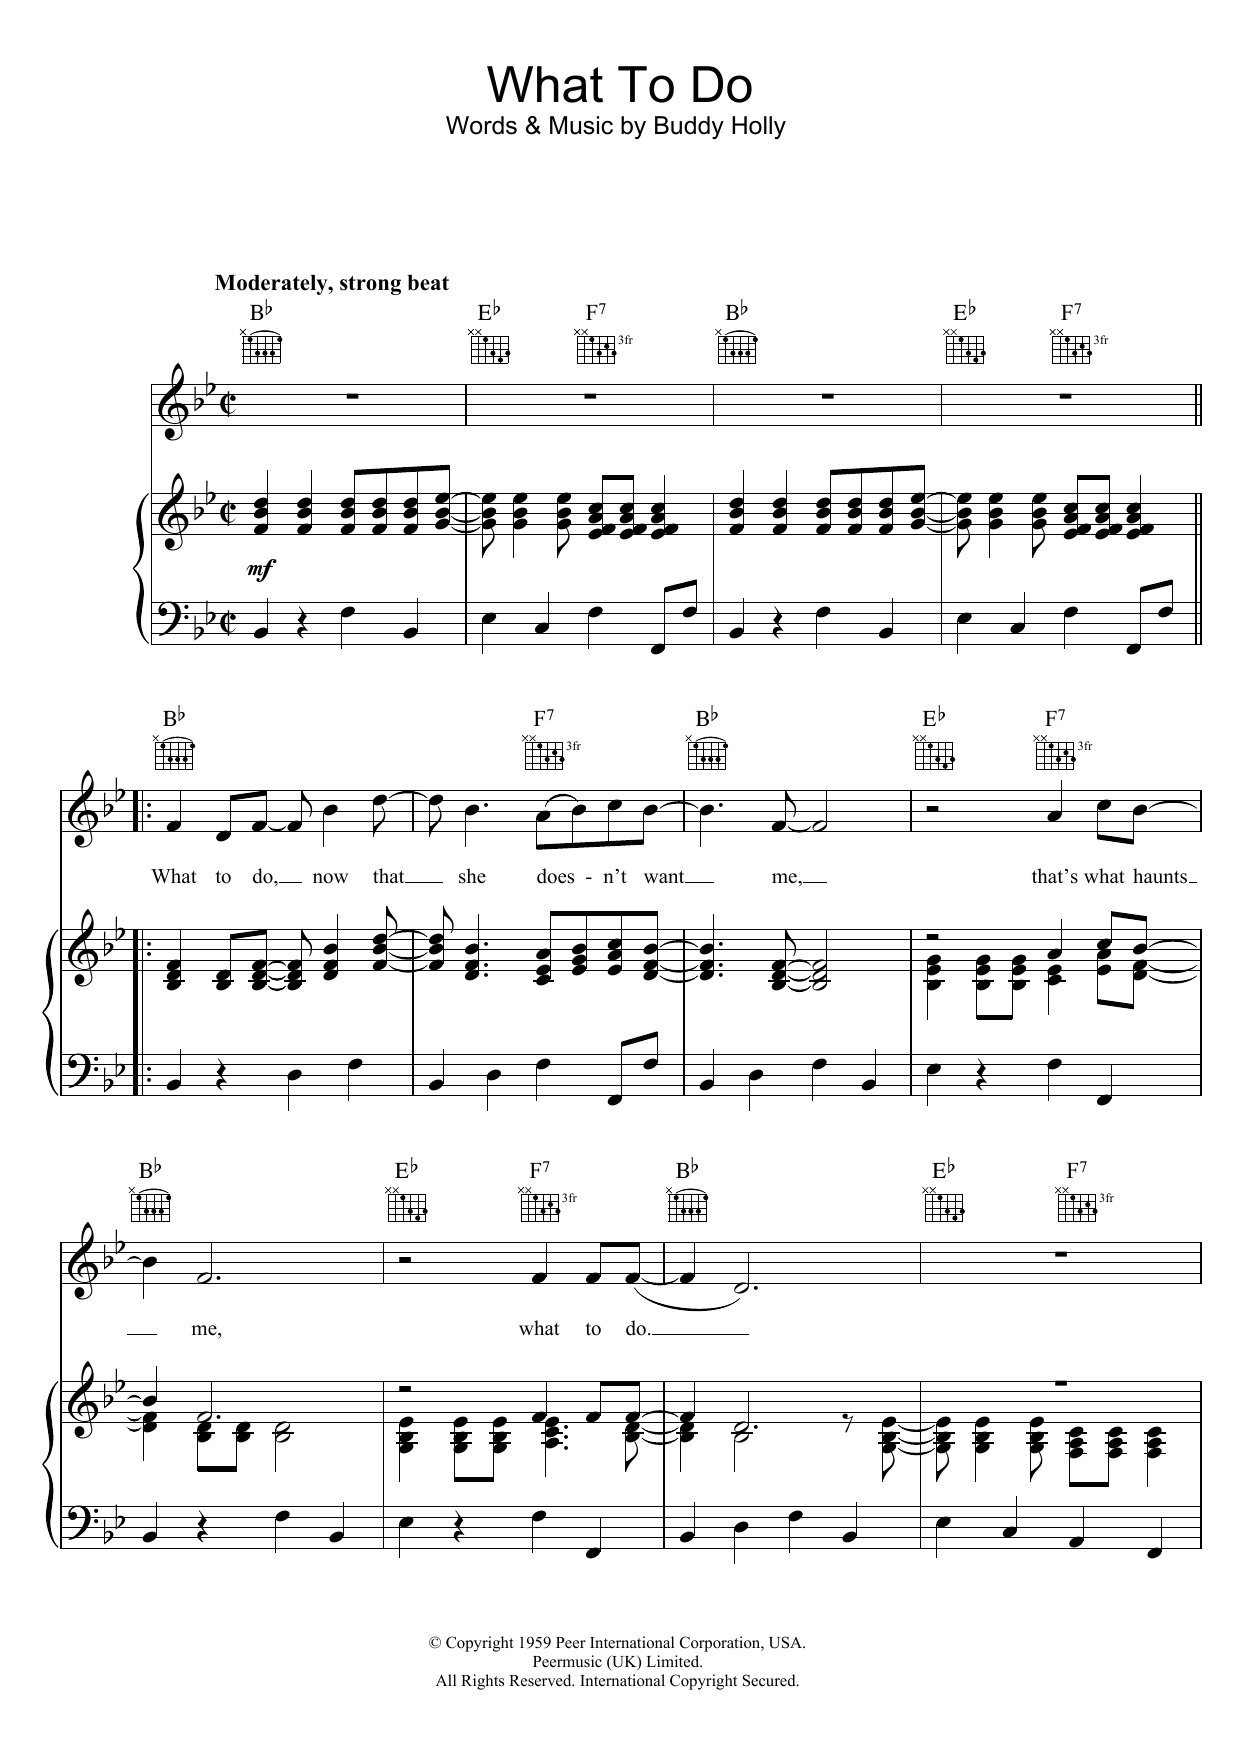 What To Do sheet music